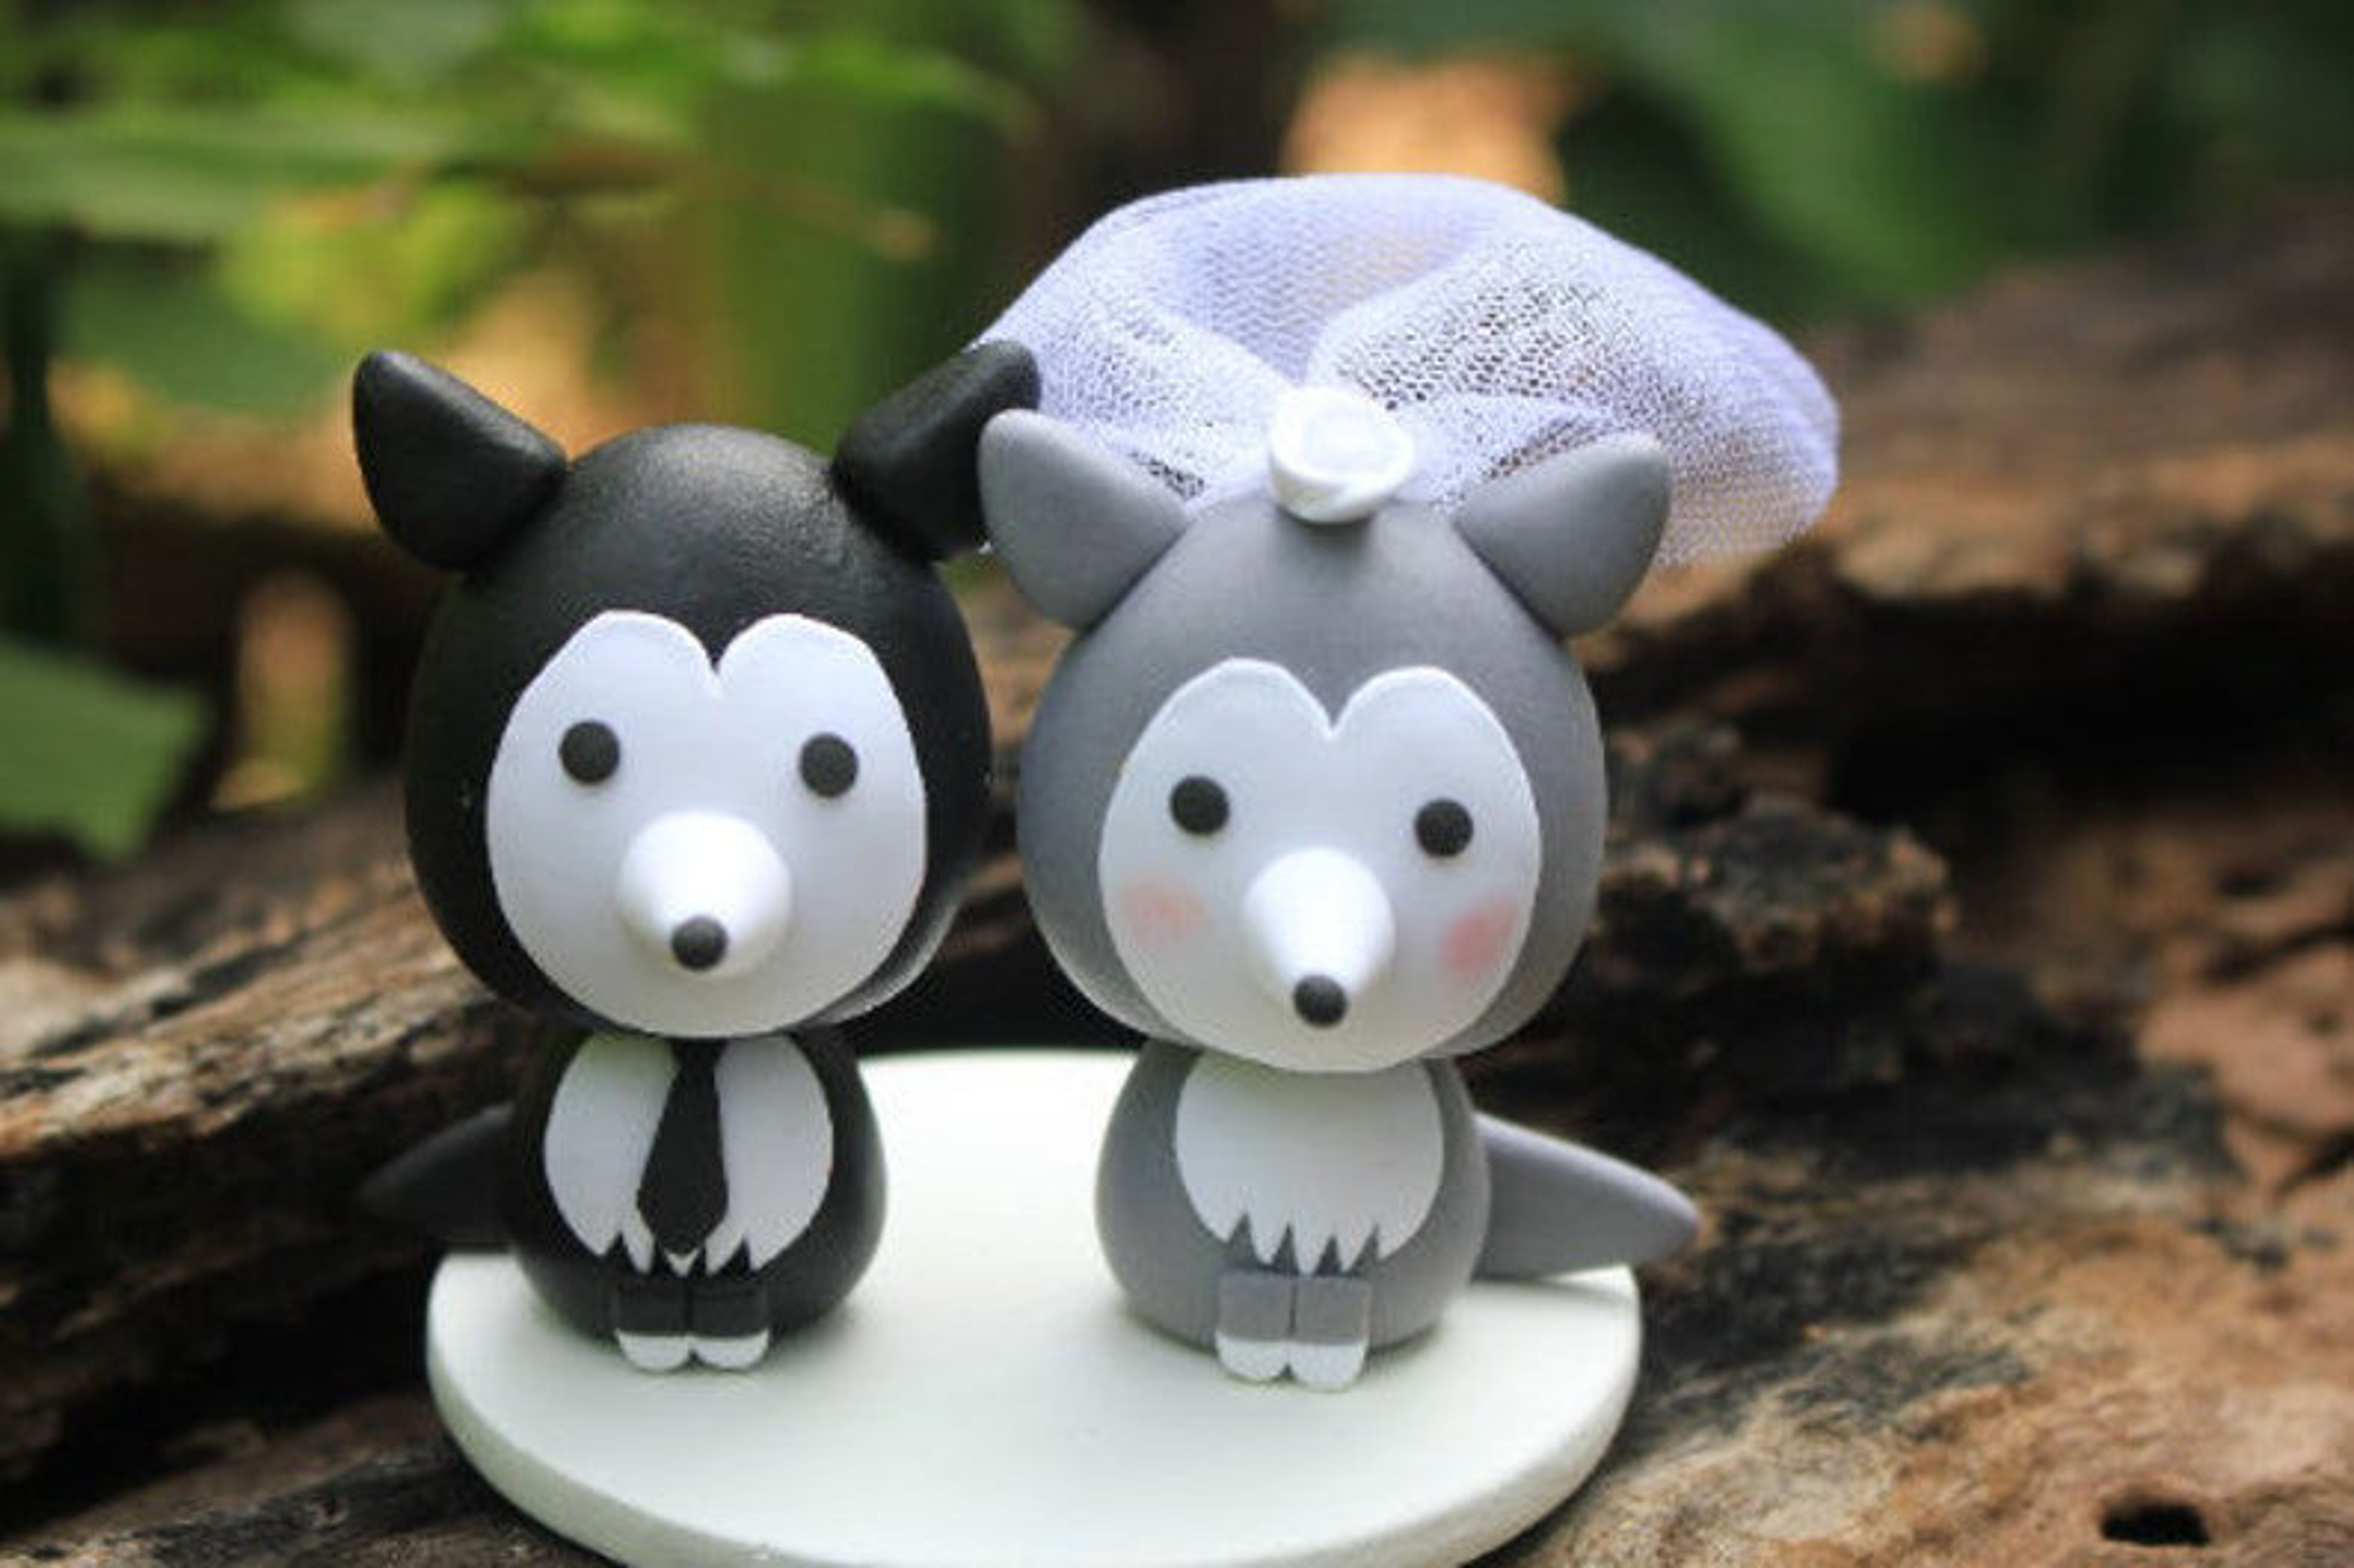 Picture of Husky Wedding Cake Topper, Dog wedding cake topper - CLEARANCE